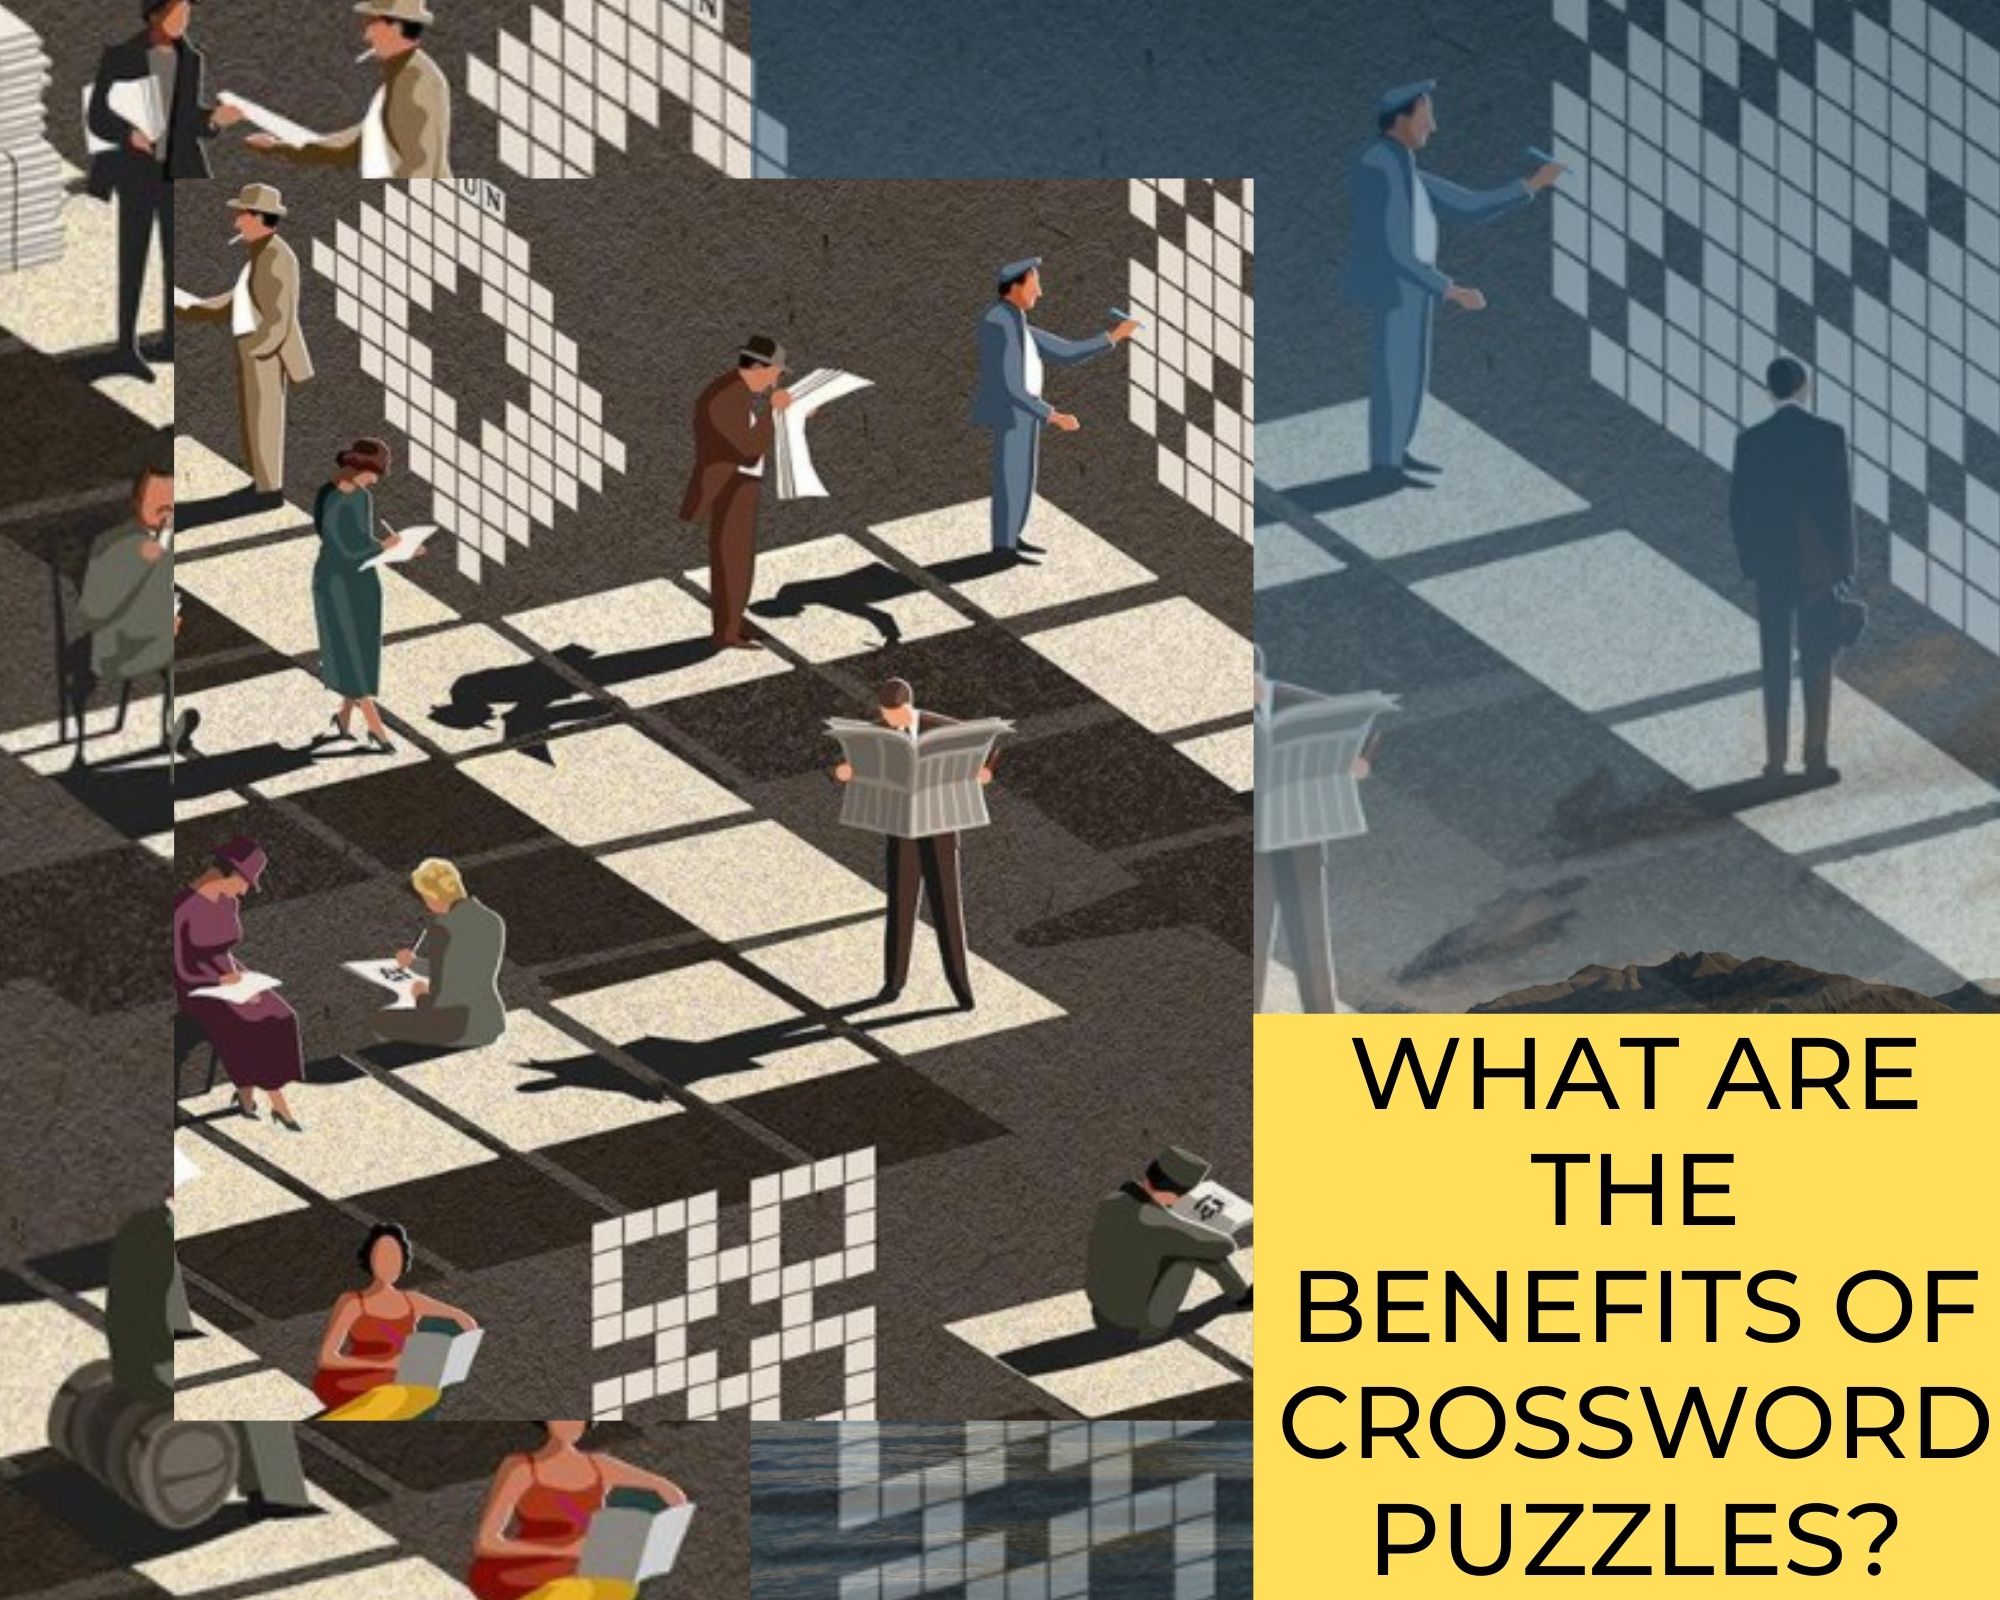 What are the benefits of Crossword Puzzles?